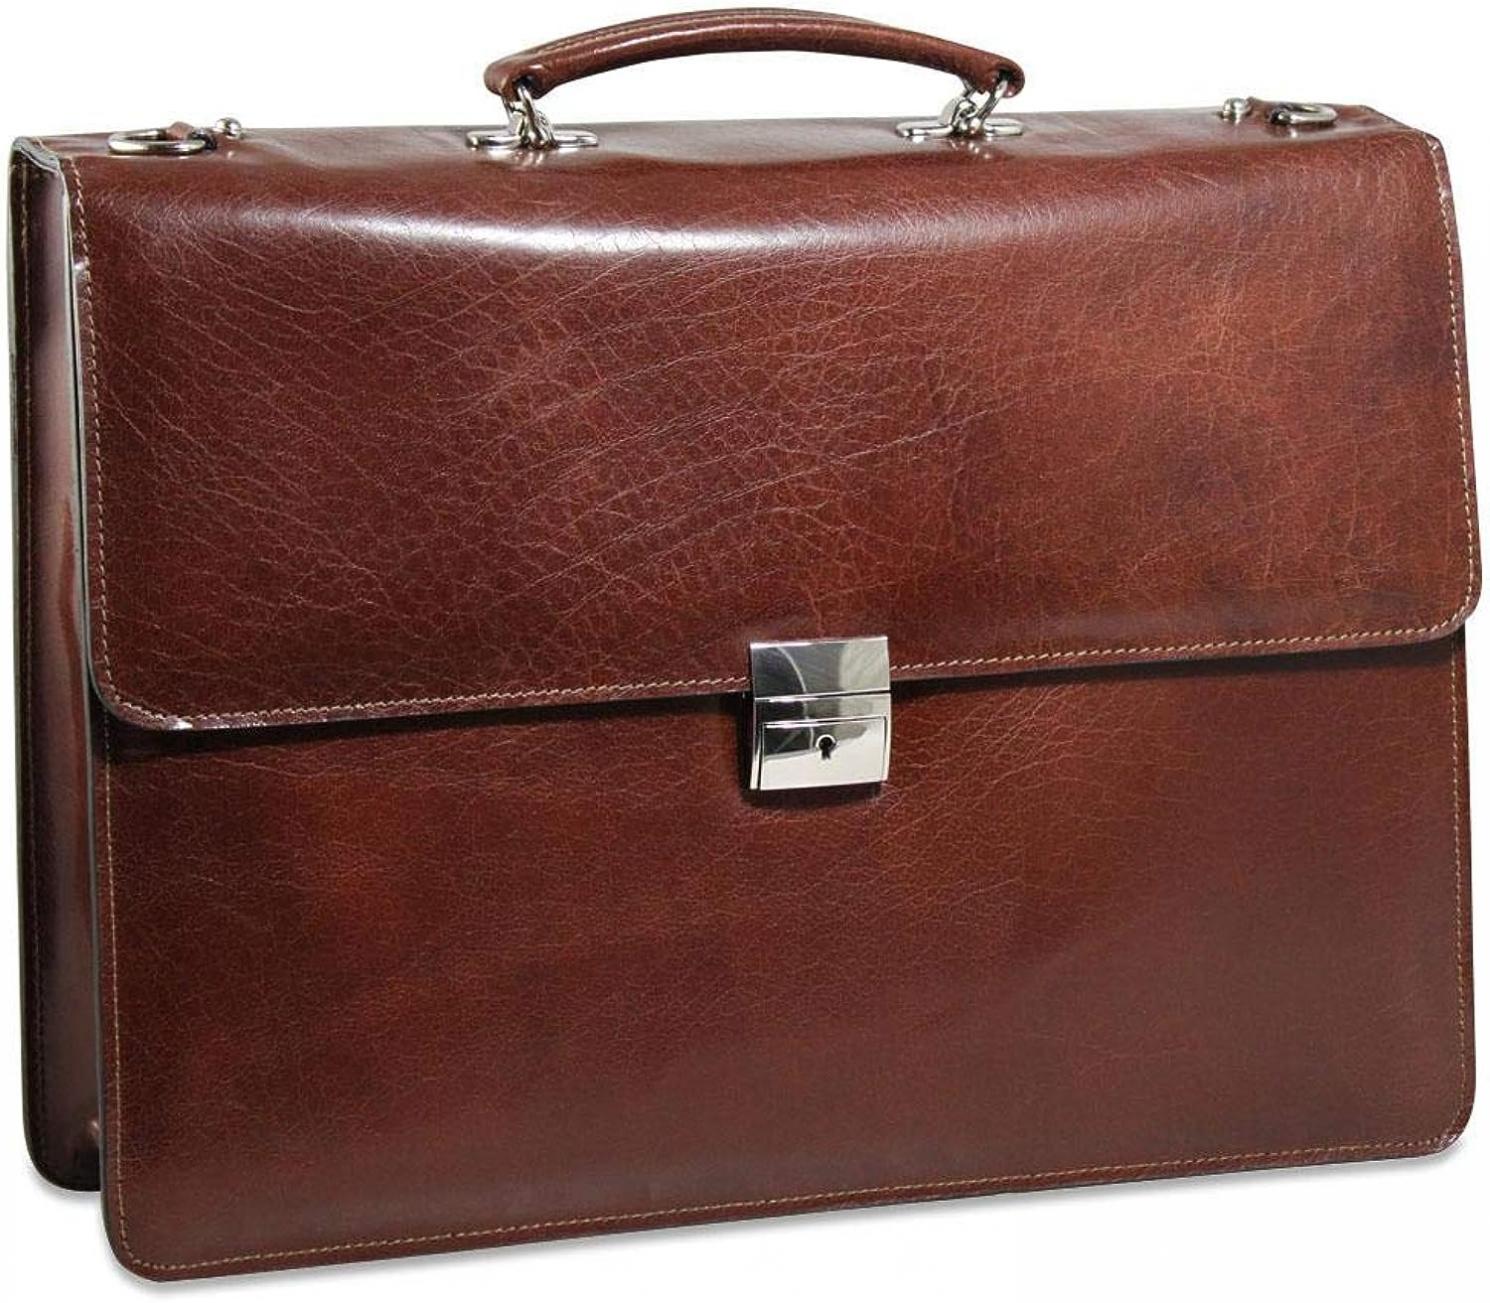 CrookhornDavis Men's Hand Stained Vegetable Tanned Italian Leather Briefcase,